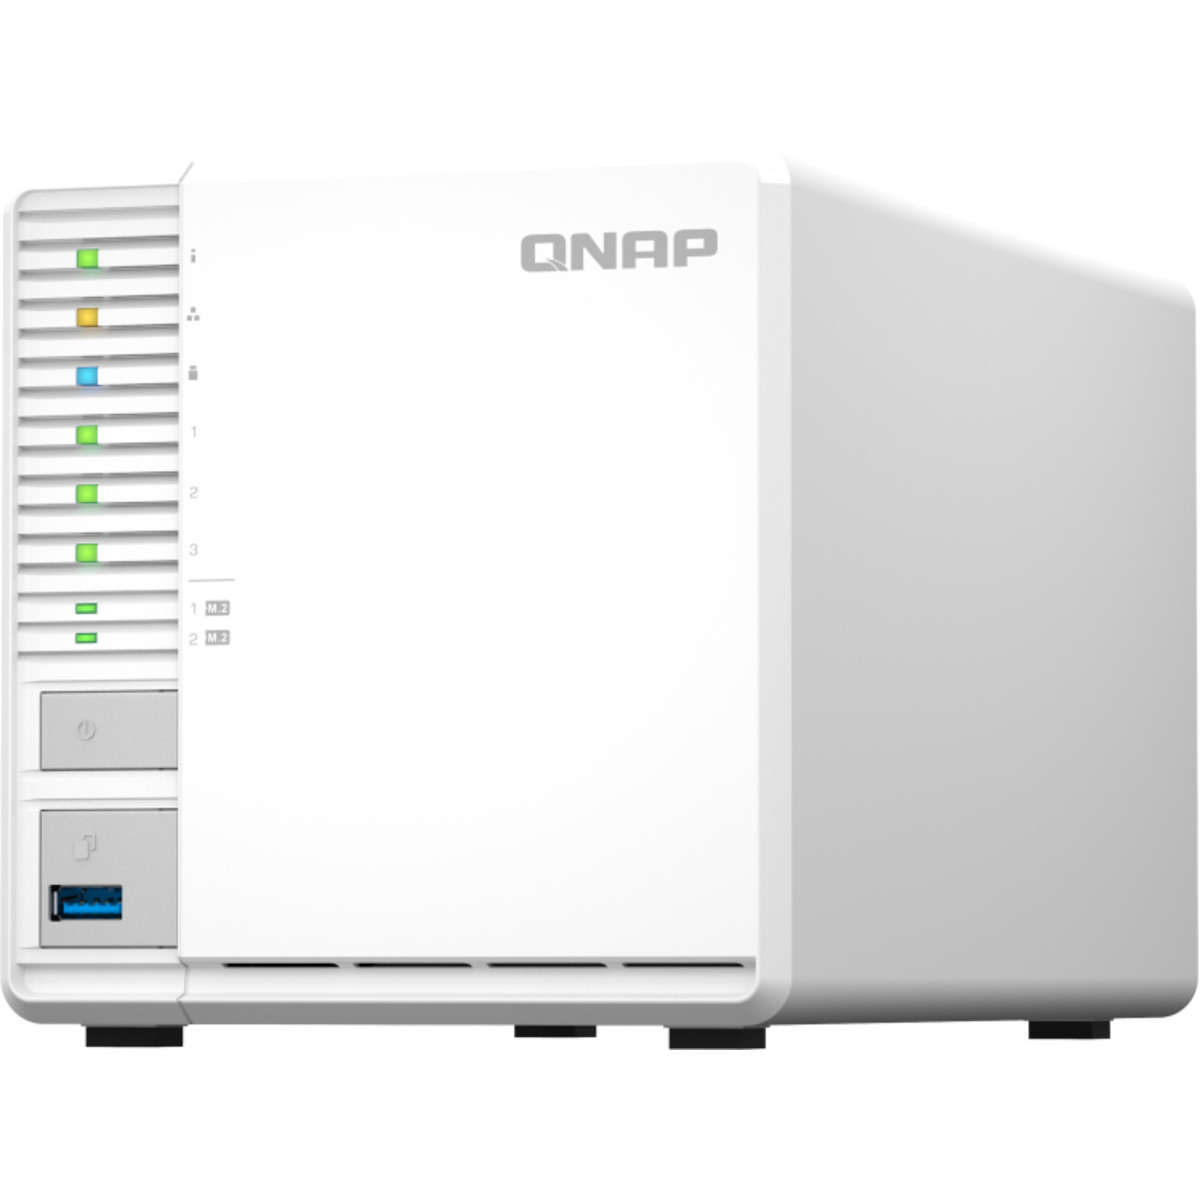 QNAP TS-364 36tb 3-Bay Desktop Multimedia / Power User / Business NAS - Network Attached Storage Device 3x12tb Seagate EXOS X18 ST12000NM000J 3.5 7200rpm SATA 6Gb/s HDD ENTERPRISE Class Drives Installed - Burn-In Tested TS-364